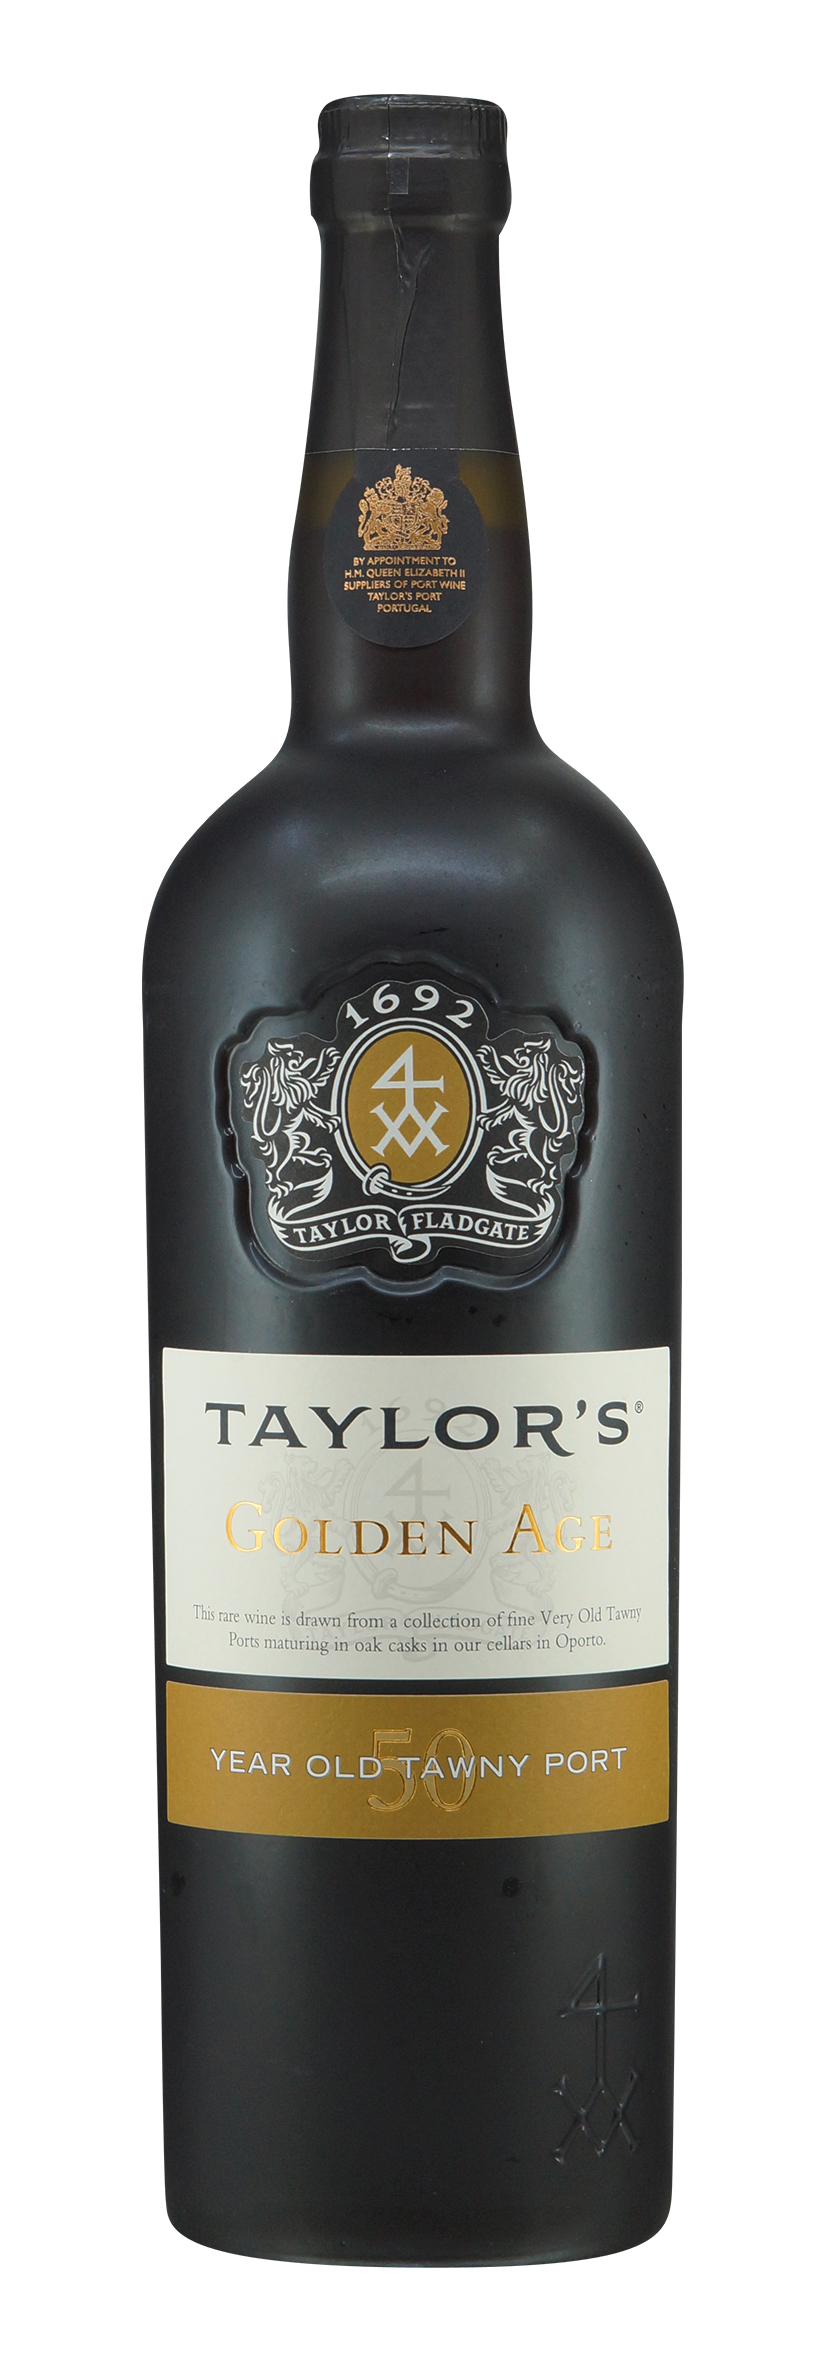 Taylor's Golden Age 50 Years old Tawny Port 0